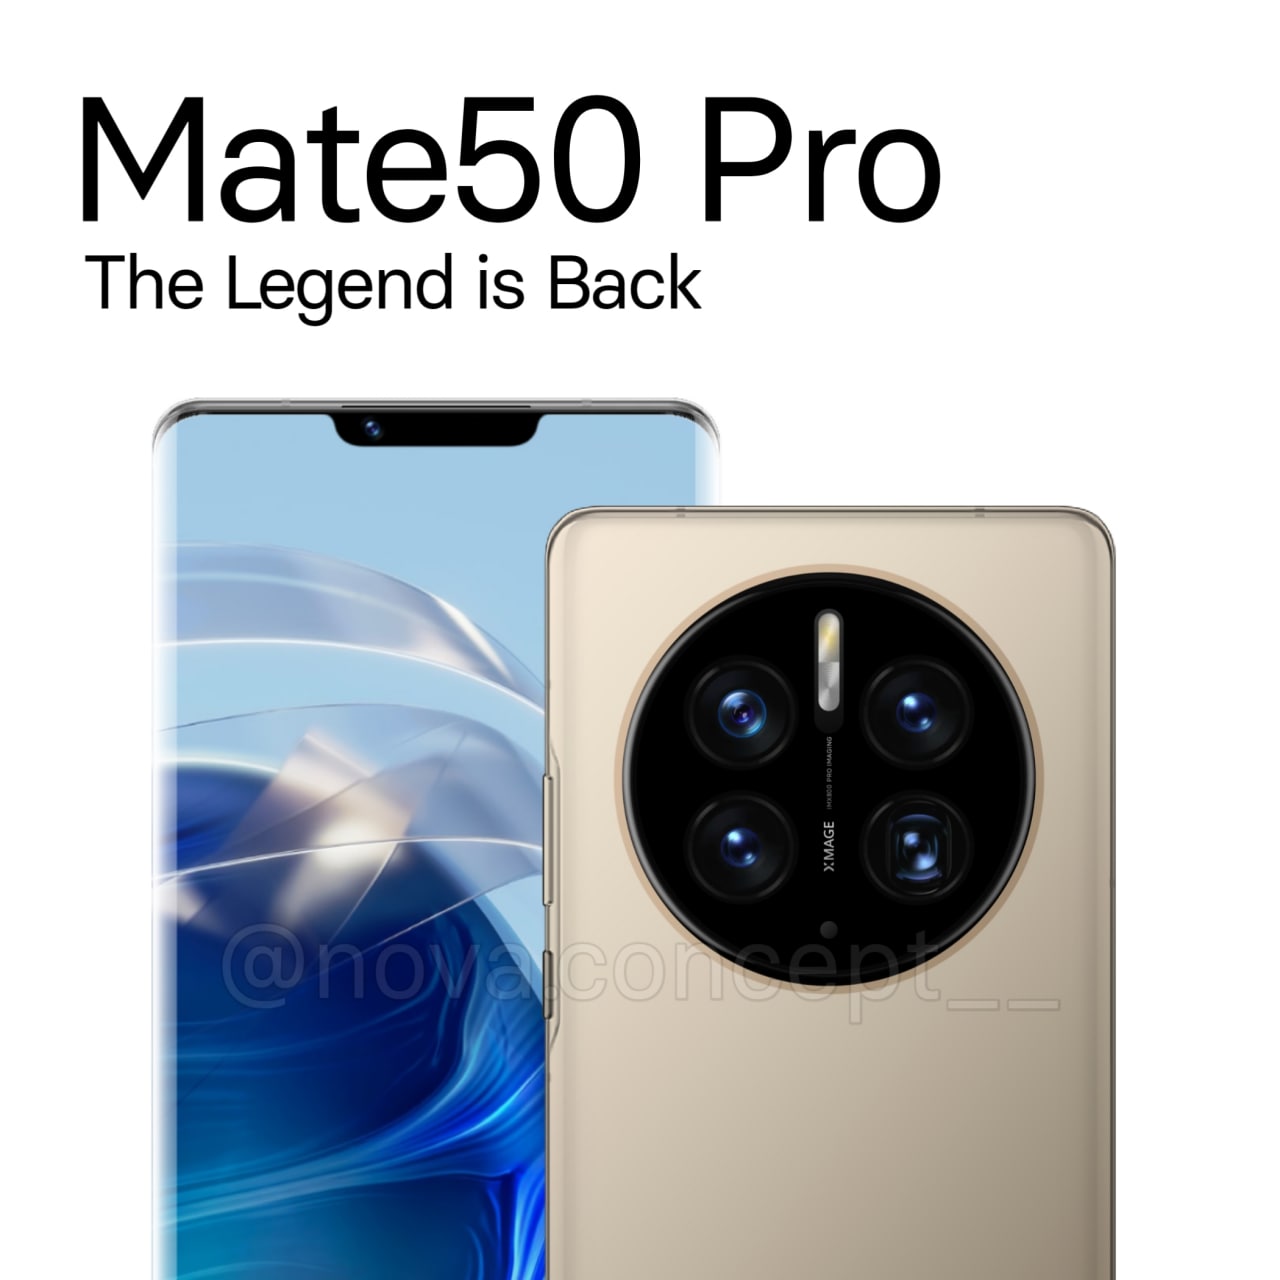 Allerlei soorten Stevig compact Check the Huawei Mate 50 Pro with colors, XMAGE and notch in renders